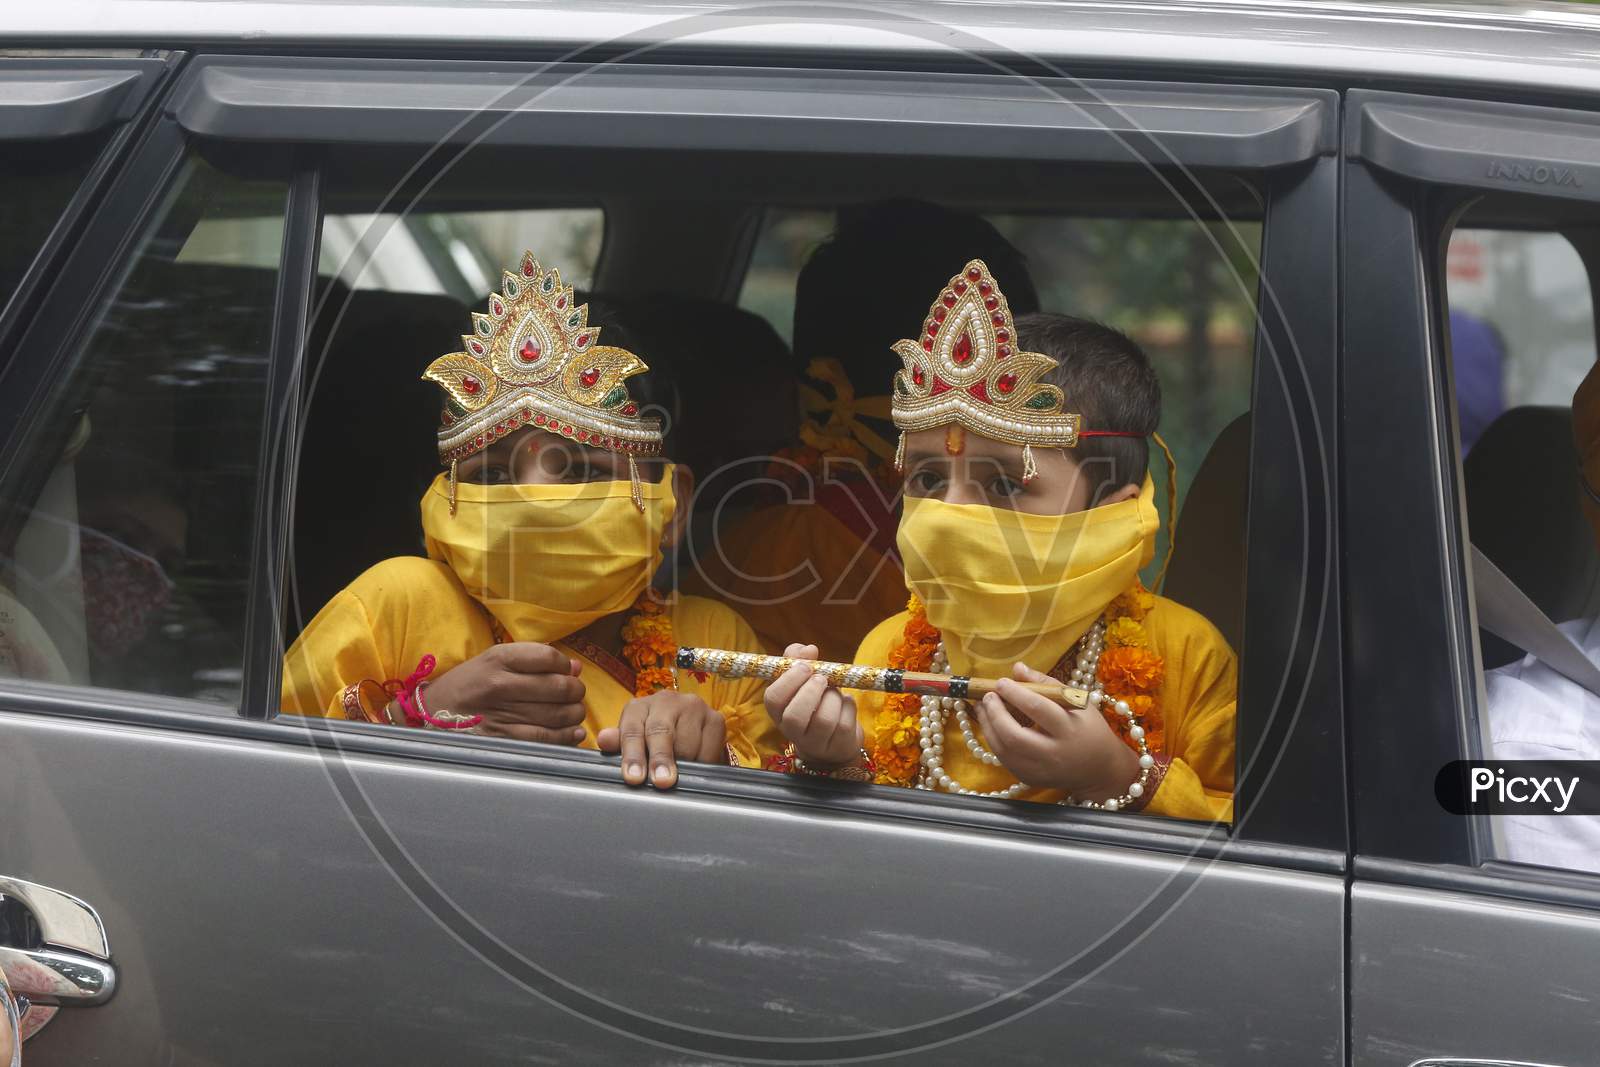 Children wear mask, dressed as Hindu Lord Krishna ride in a car during Janmashtami celebrations, in Chandigarh August 11, 2020